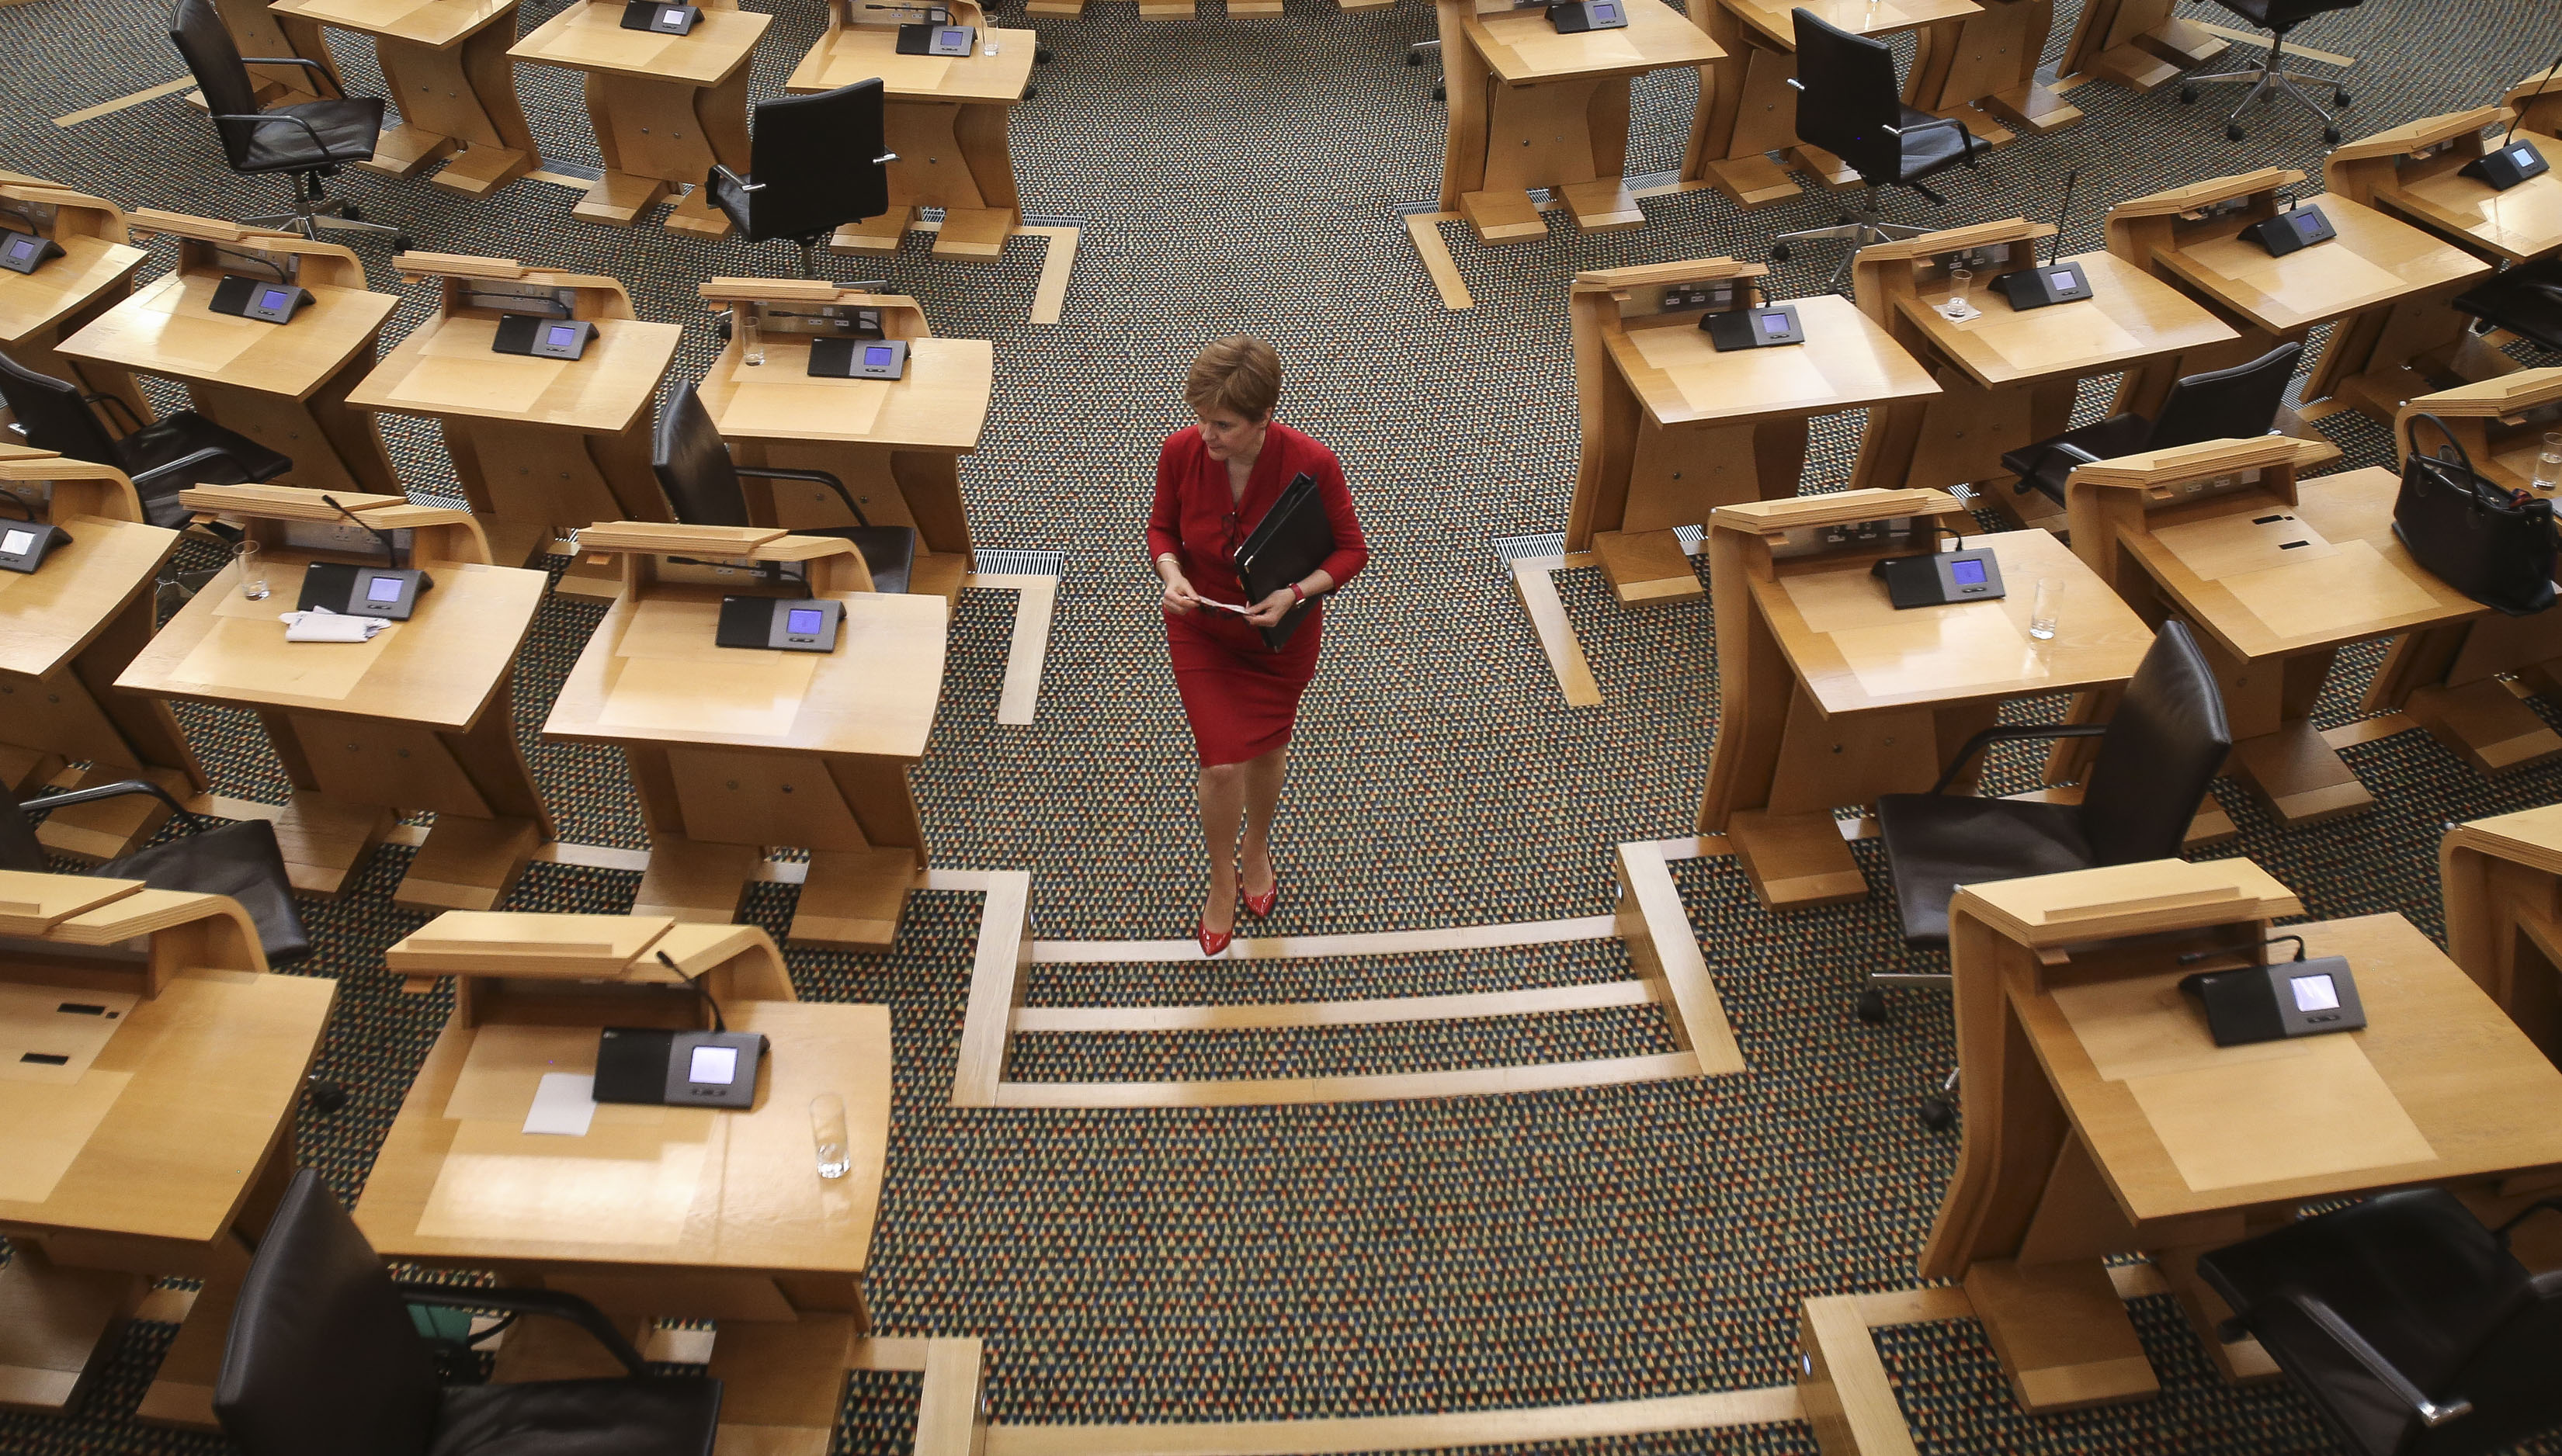 EDINBURGH, SCOTLAND - AUGUST 26:First Minister Nicola Sturgeon attends First Ministers Questions at the Scottish Parliament Holyrood on August 26, 2020 in Edinburgh, Scotland. (Photo by Frase